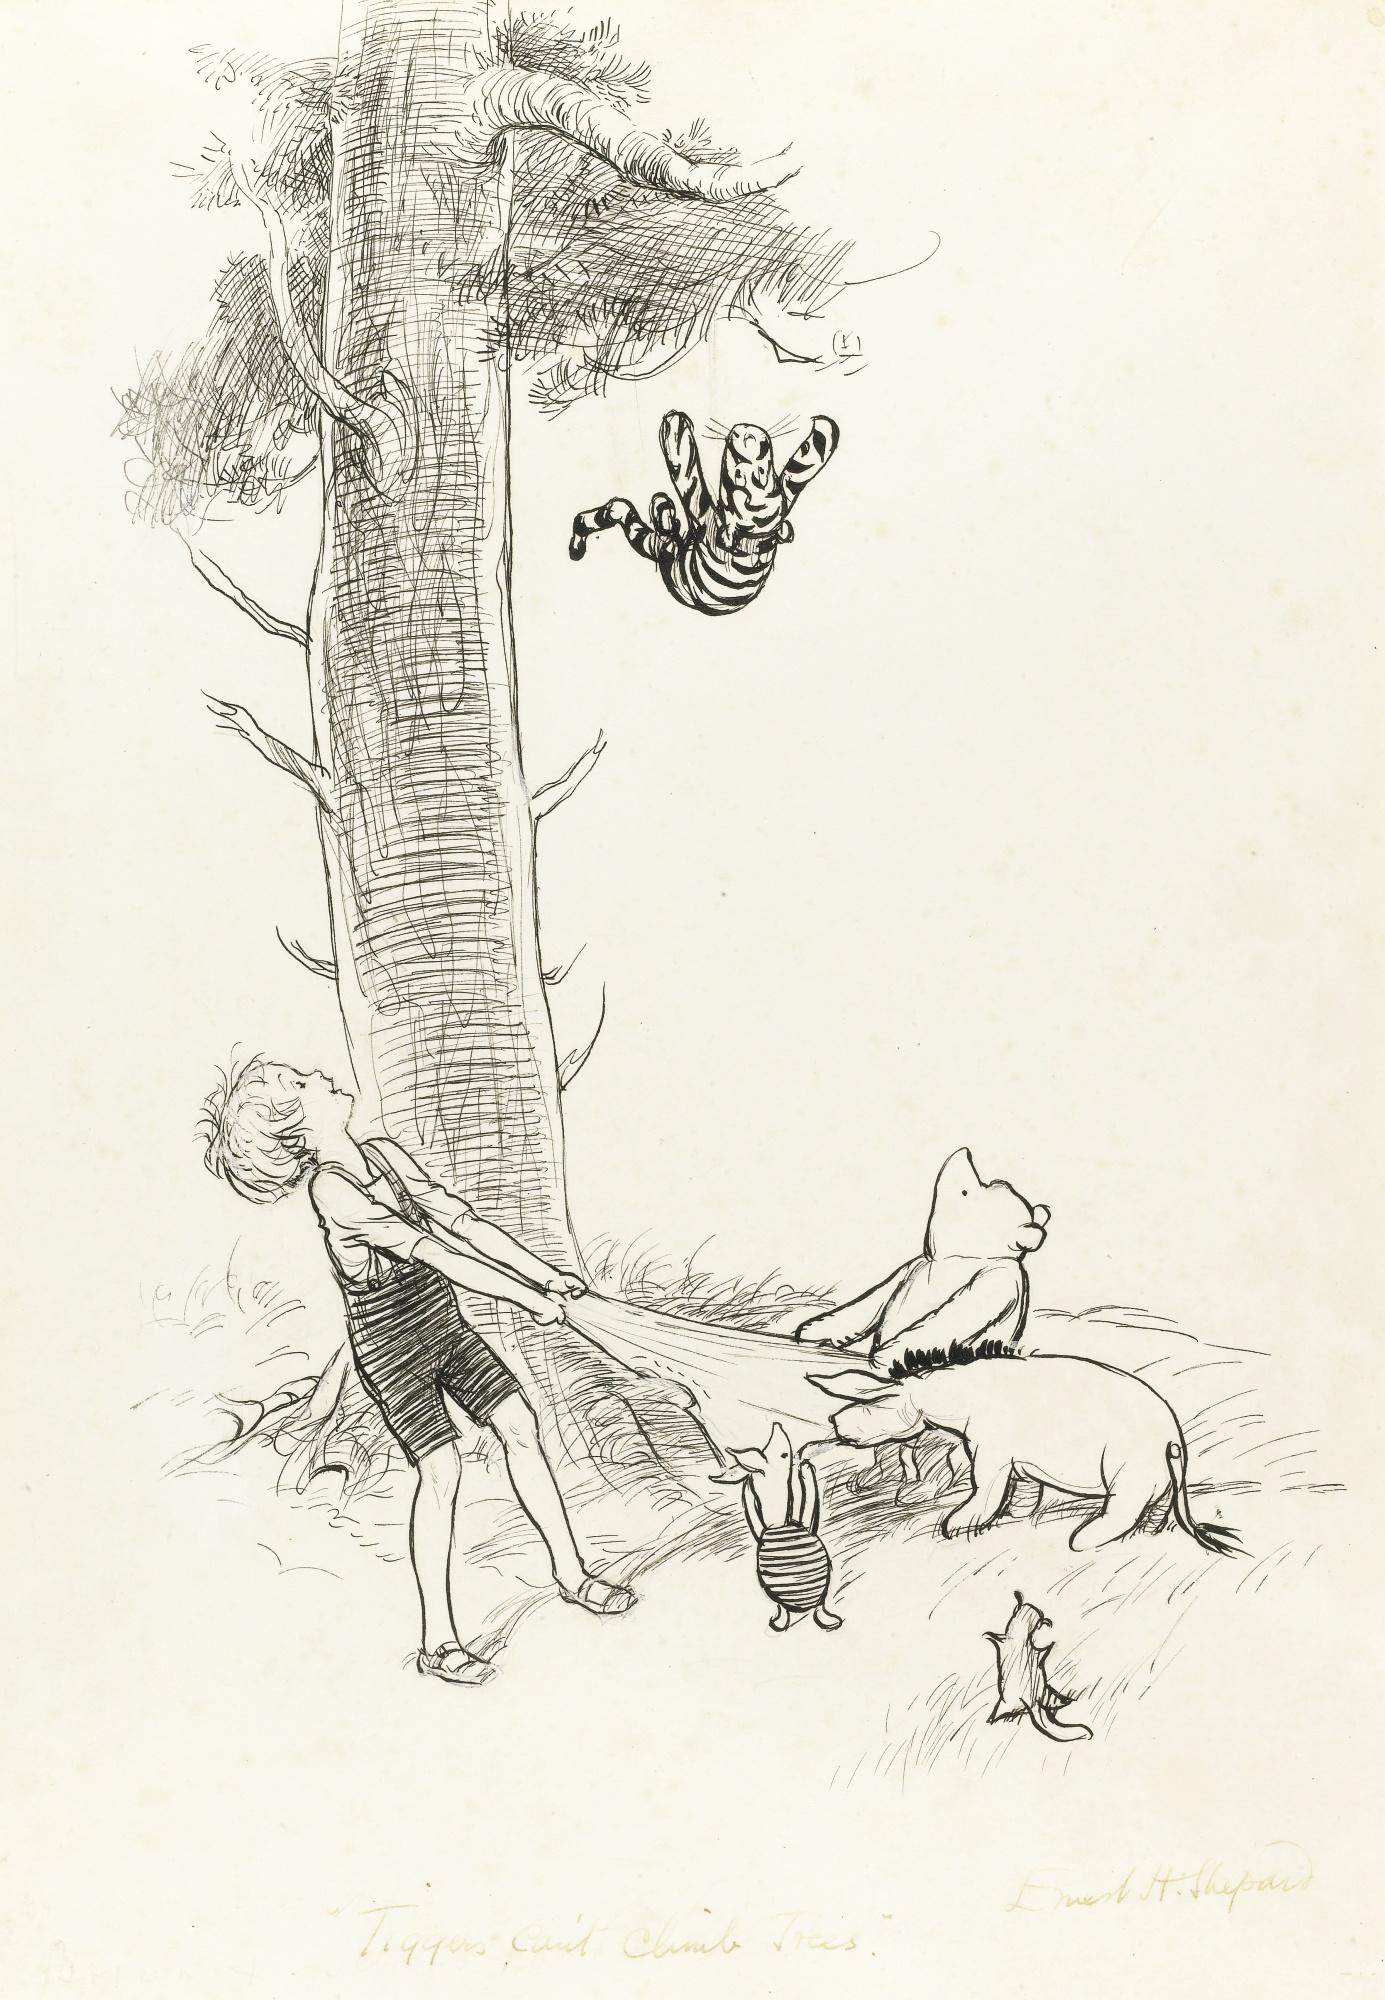 An illustration of Tigger falling out of a tree and about to be caught by Christopher Robin, Poo, Piglet, Eeyore, and a squirrel.